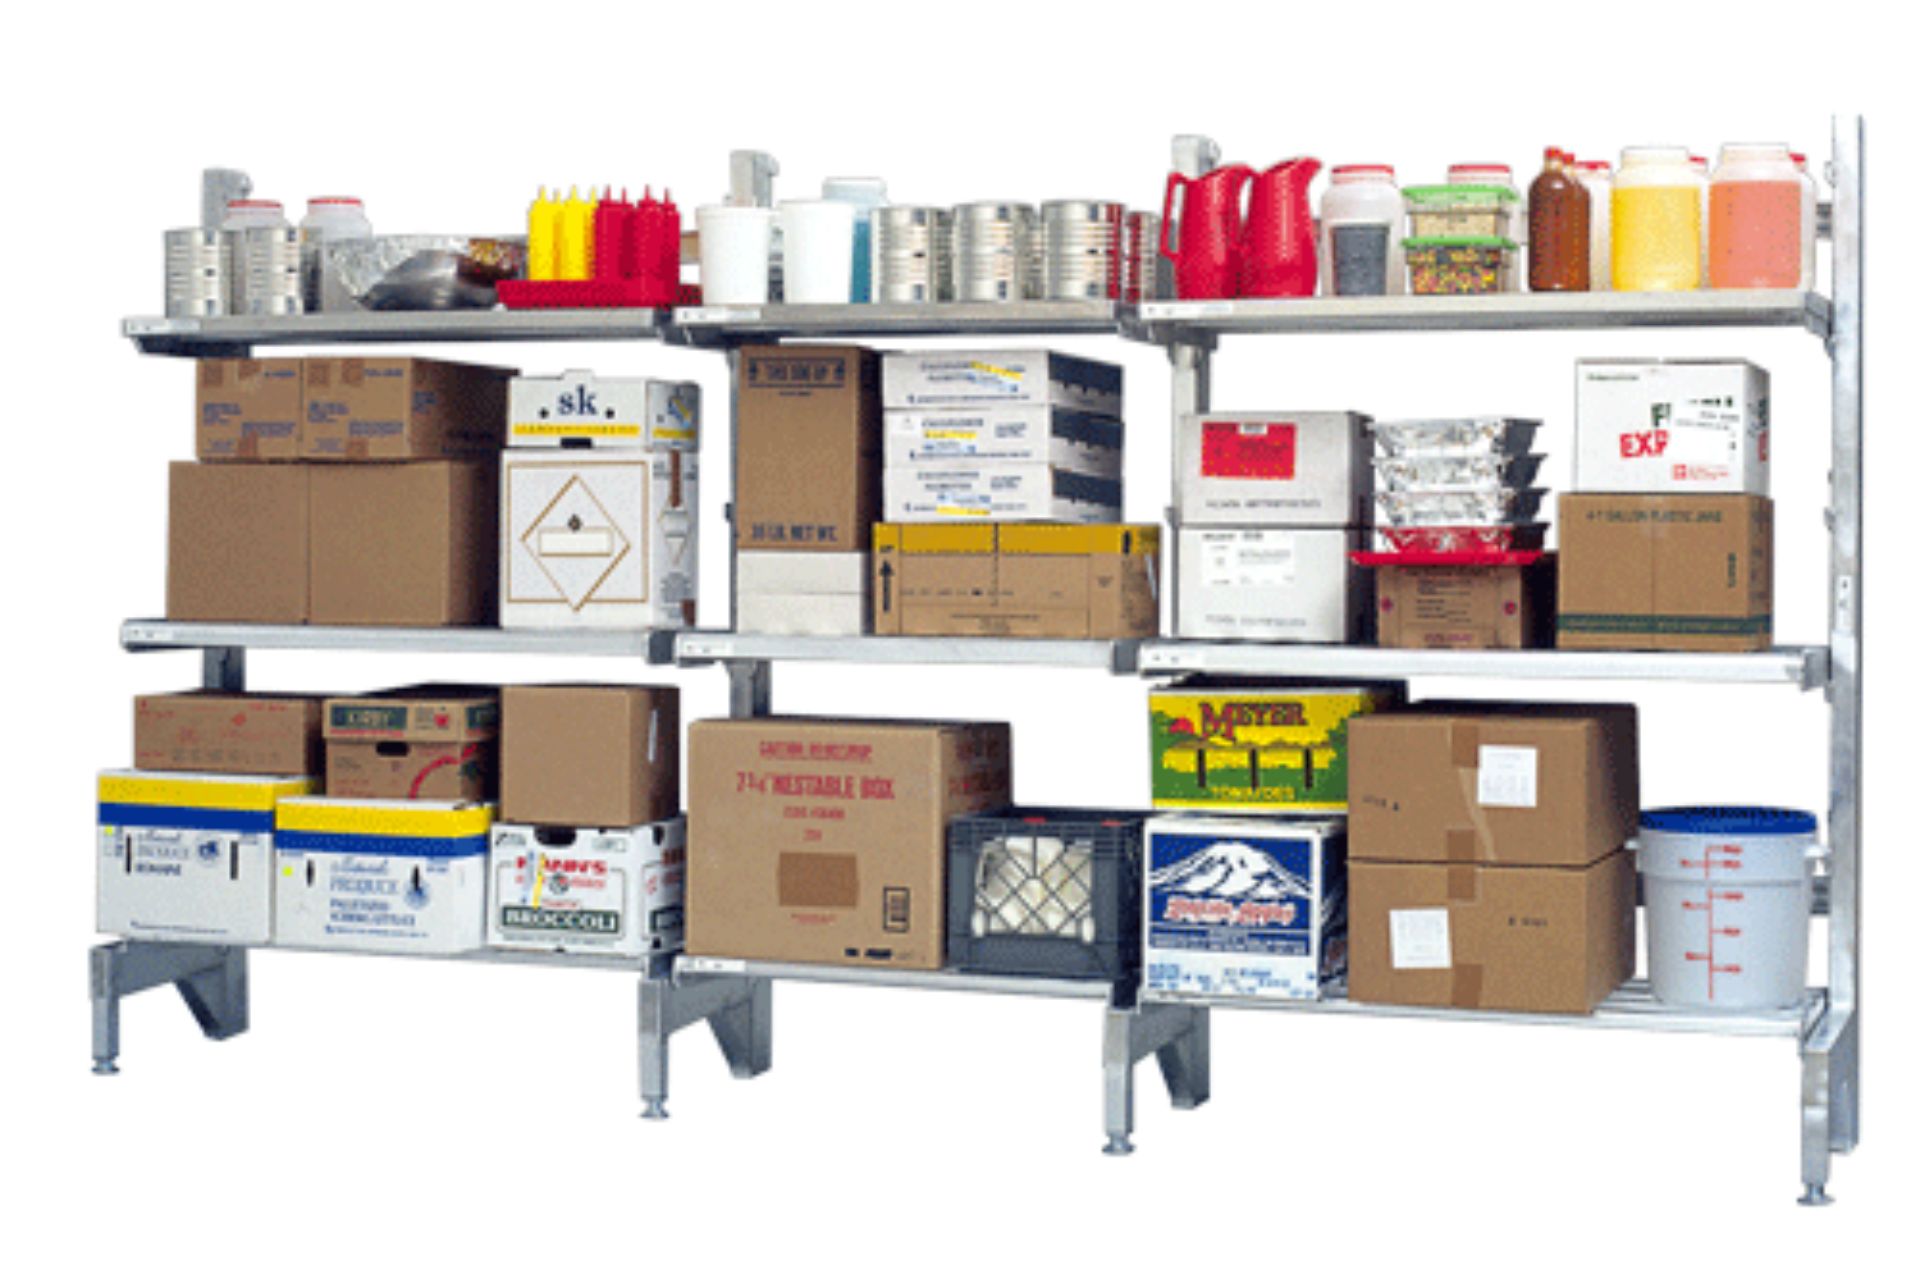 4 Things to Consider When Setting up Walk-In Cooler Storage